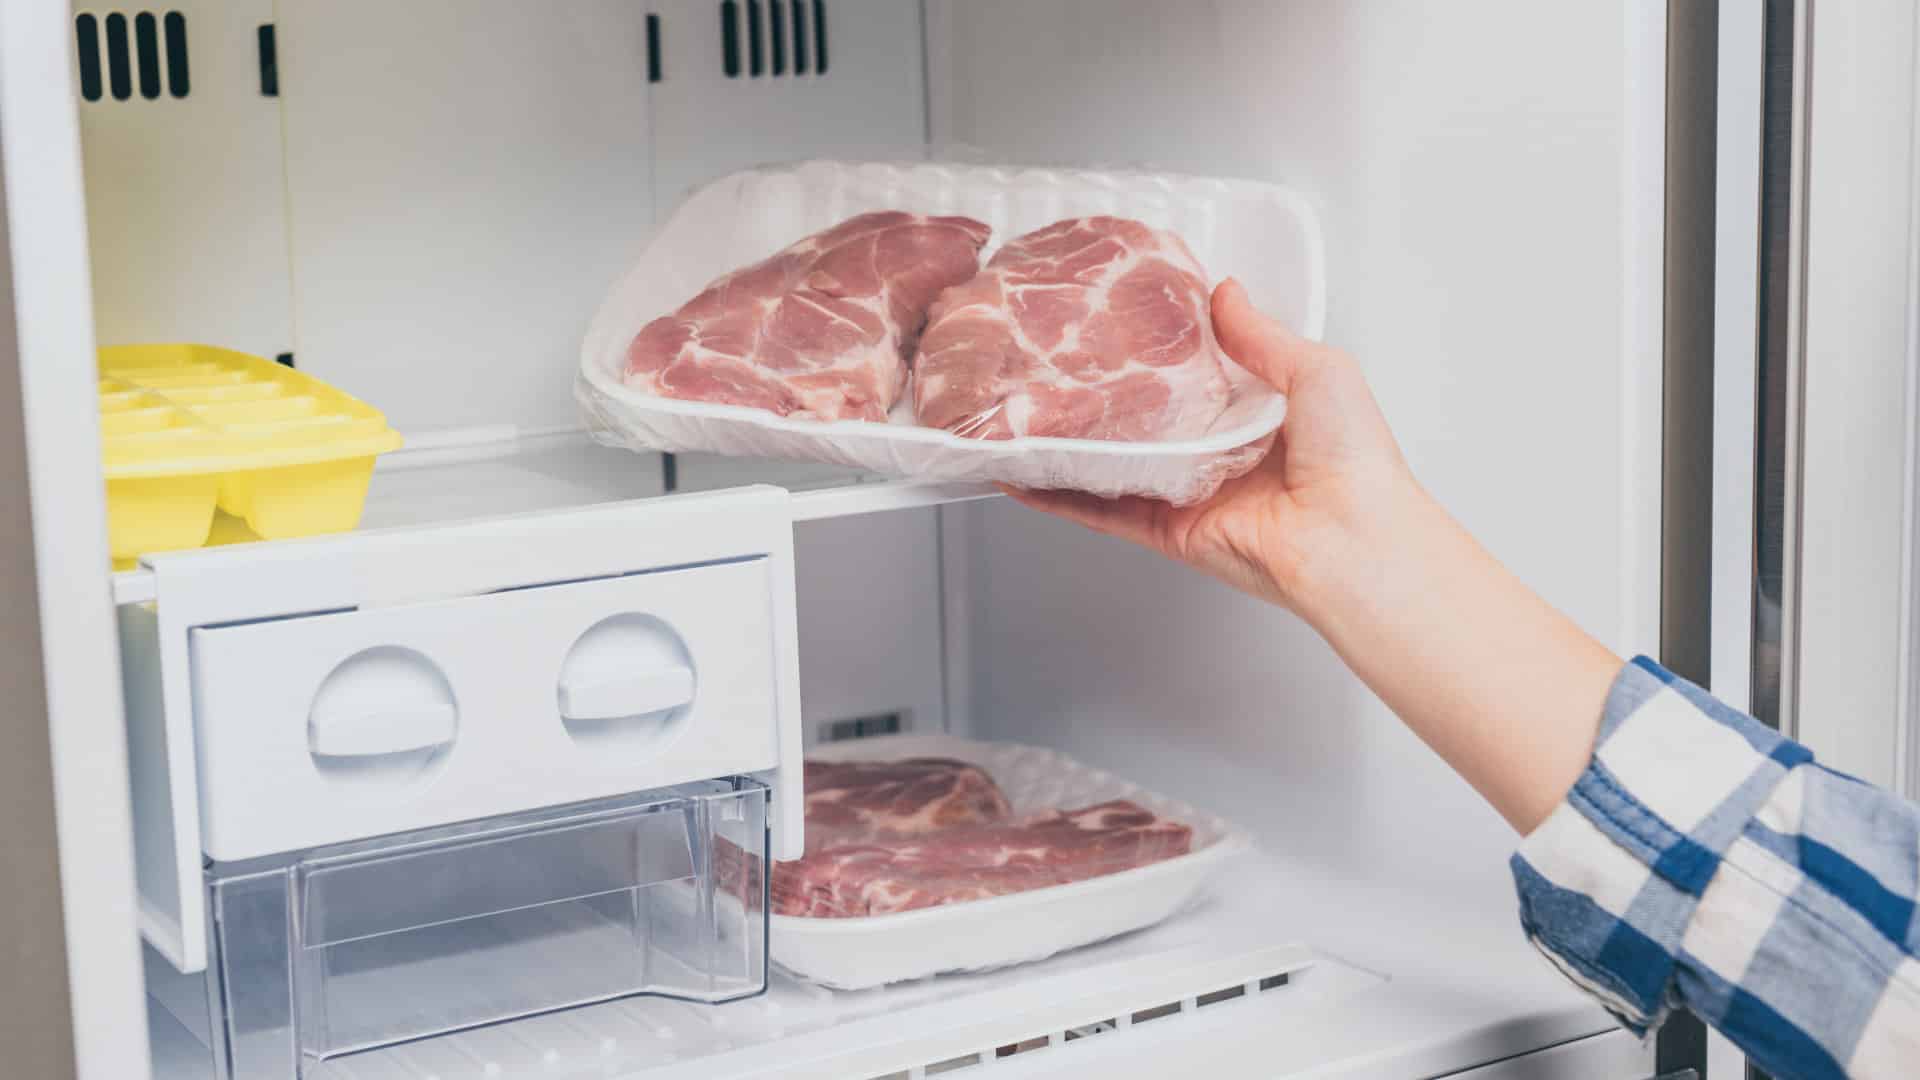 Featured image for “How To Store Meat in The Freezer”